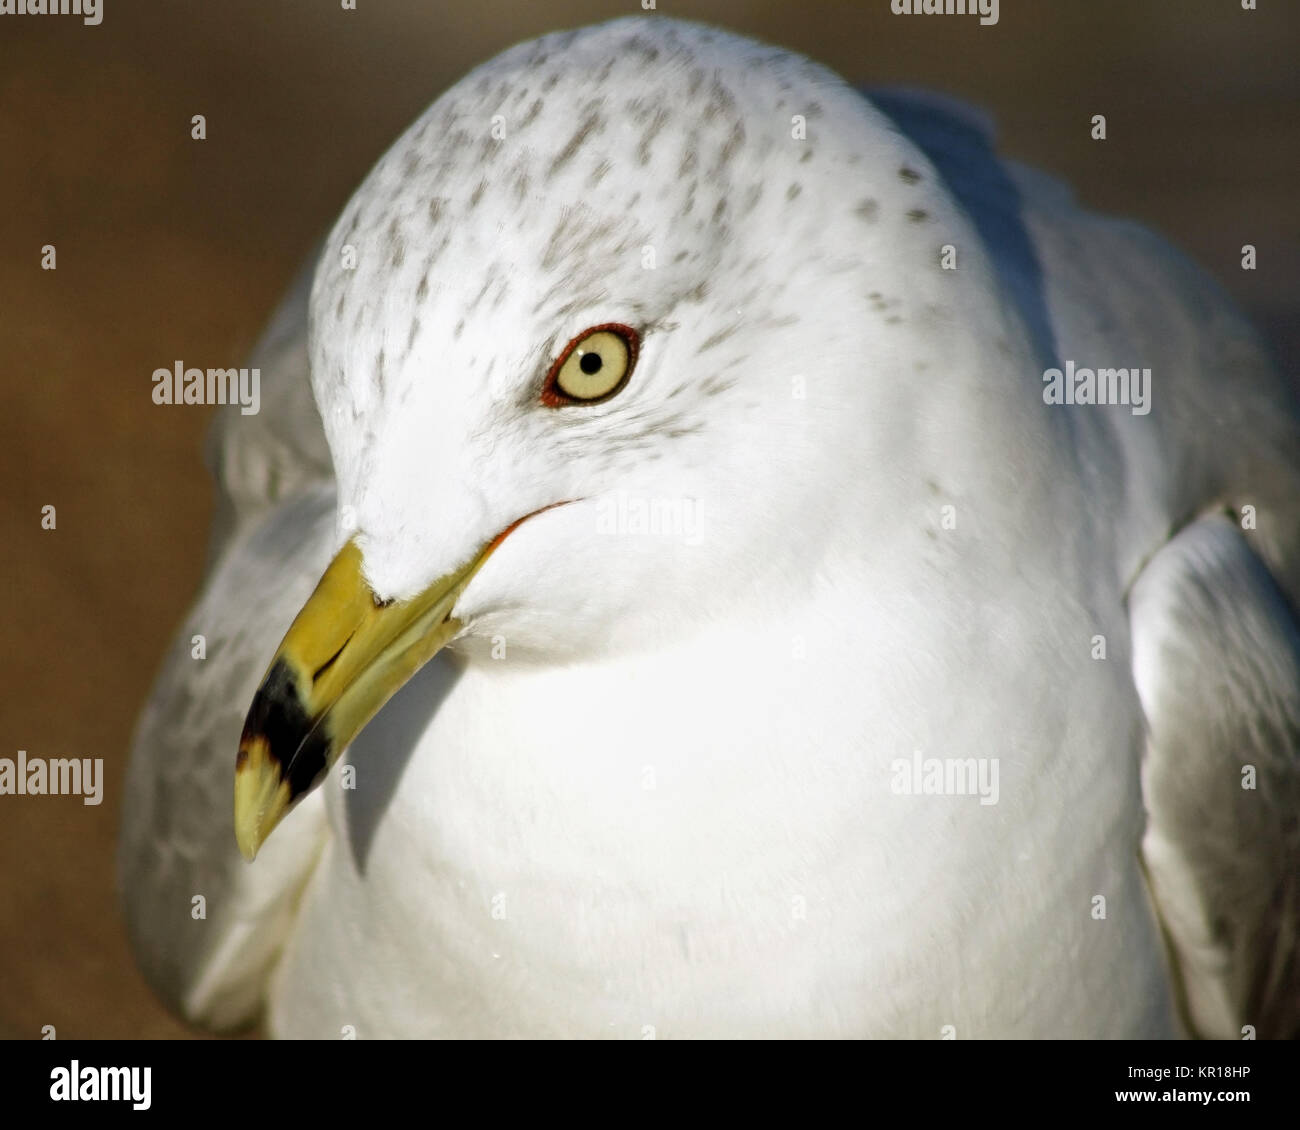 Close up of the Ring-Billed seagull with its distinctive beak and yellow eyes Stock Photo